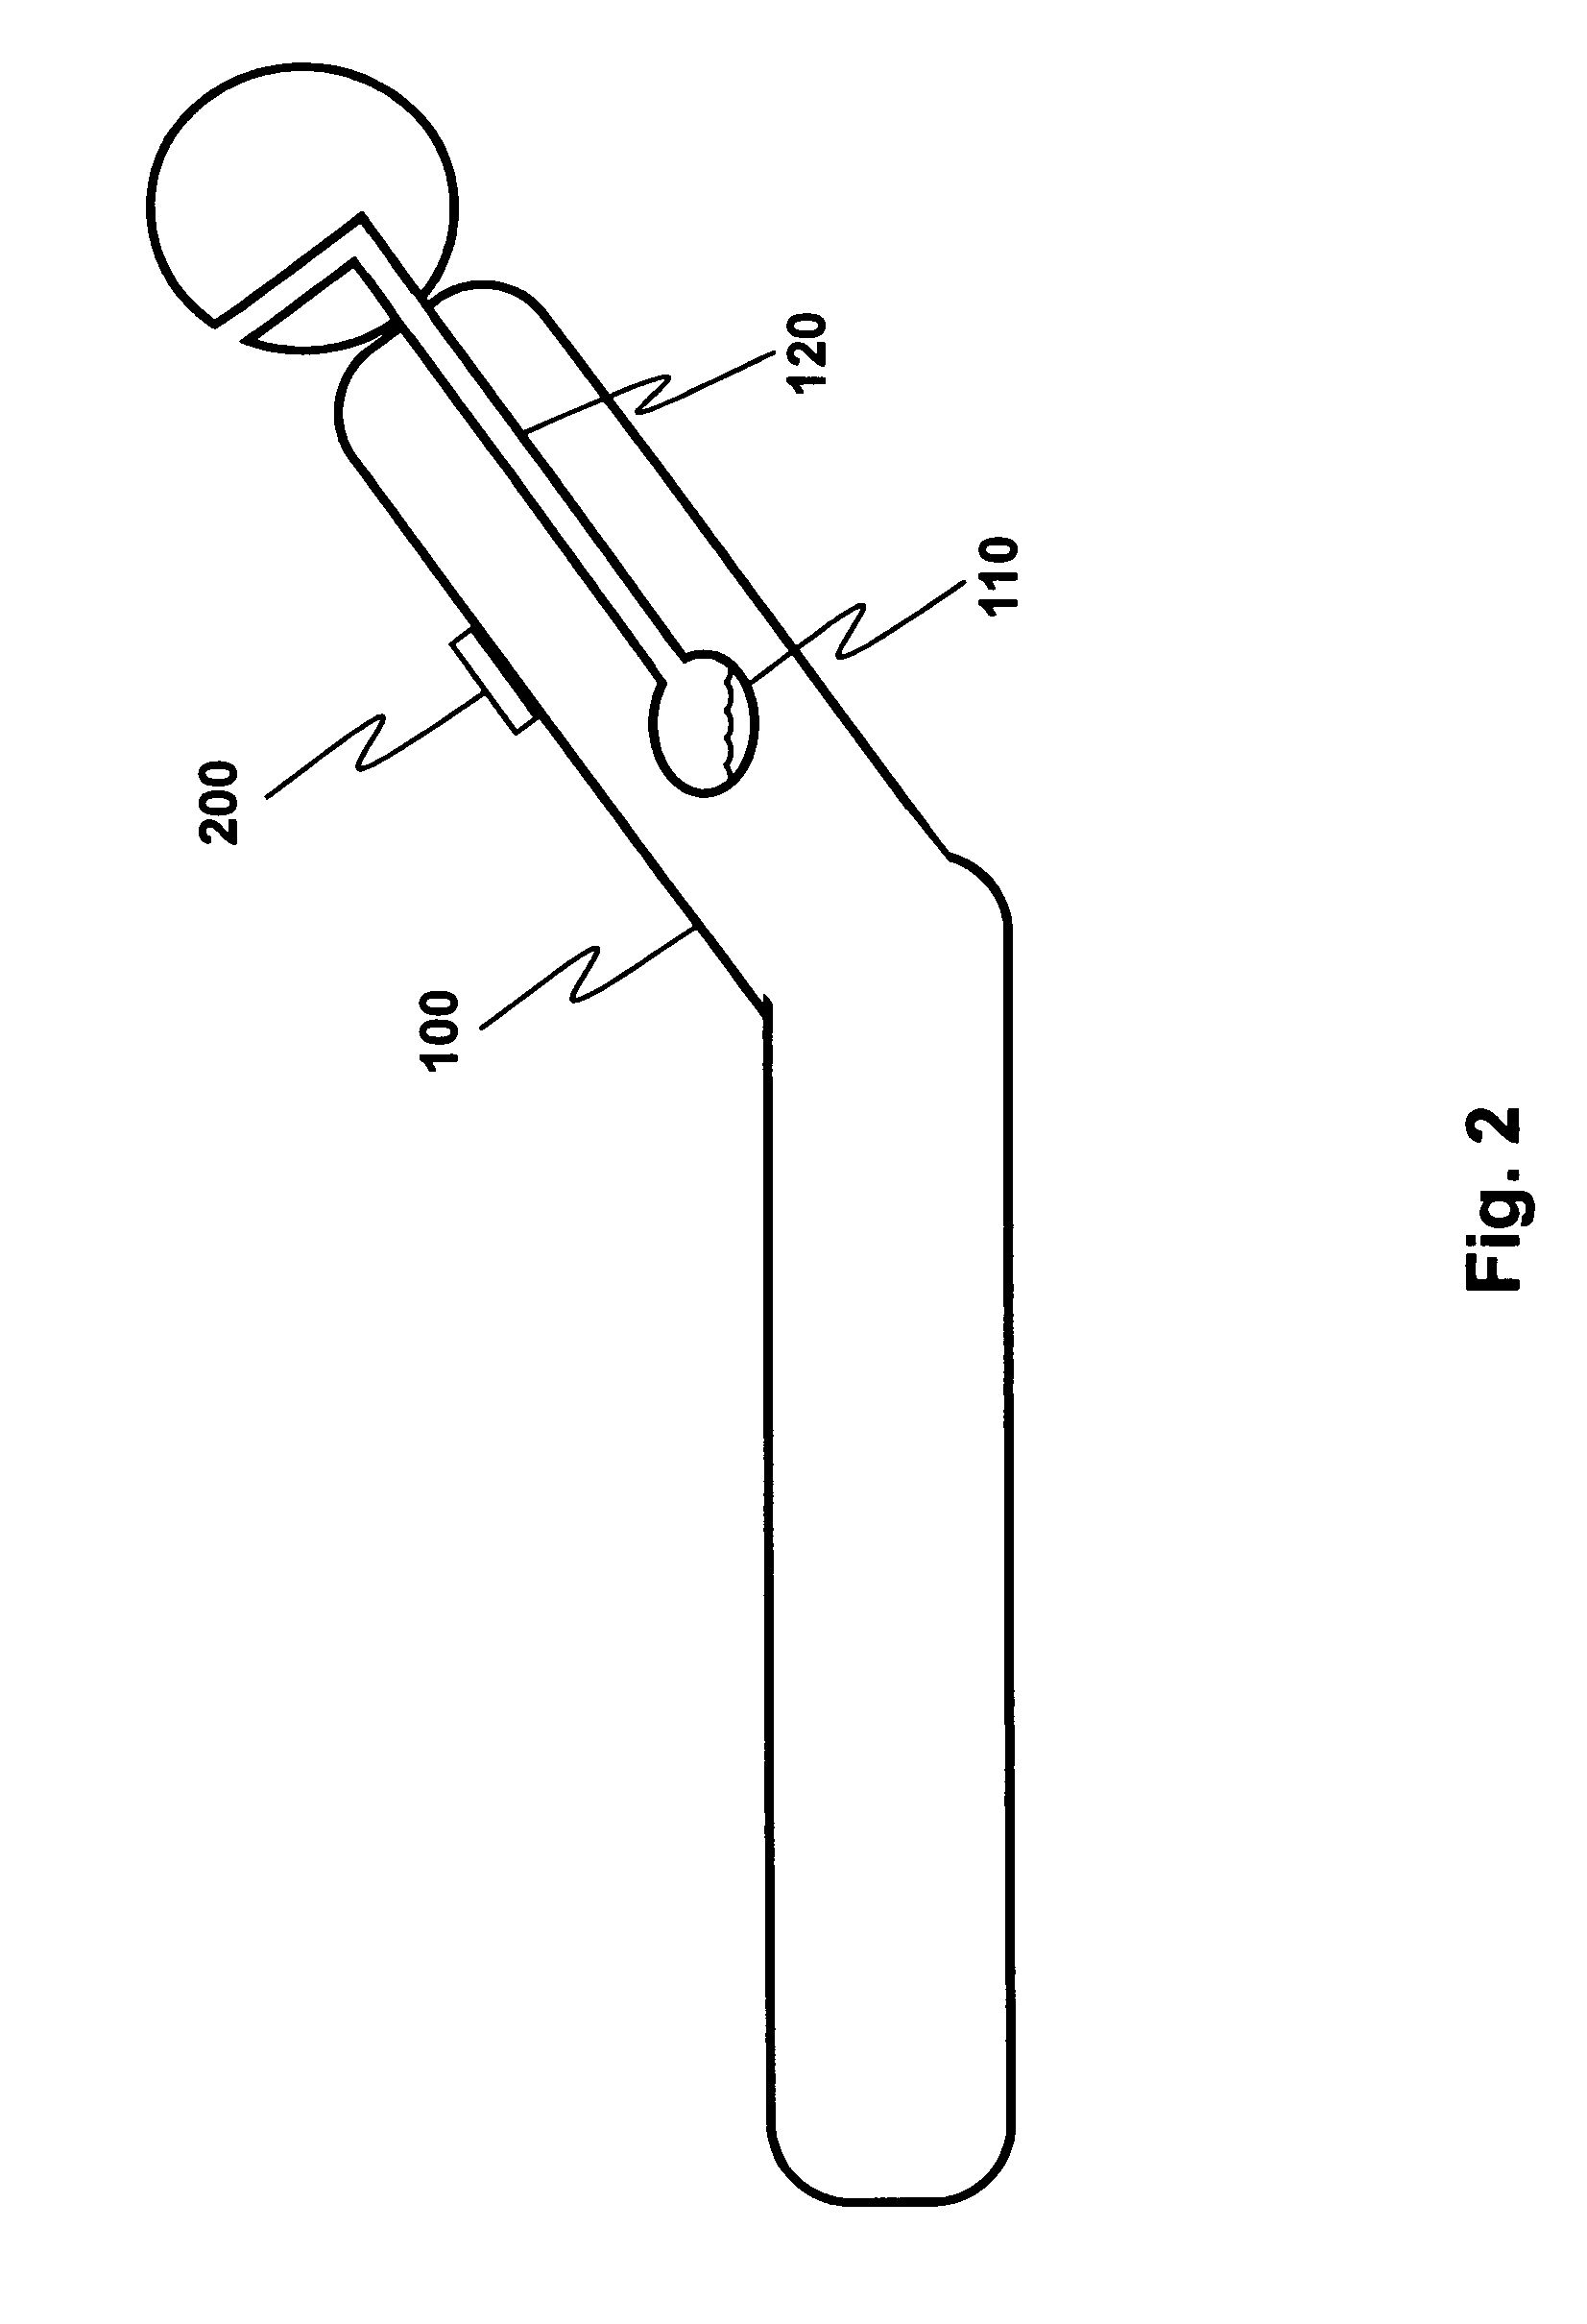 Anti-aspiration device with content monitoring functionality